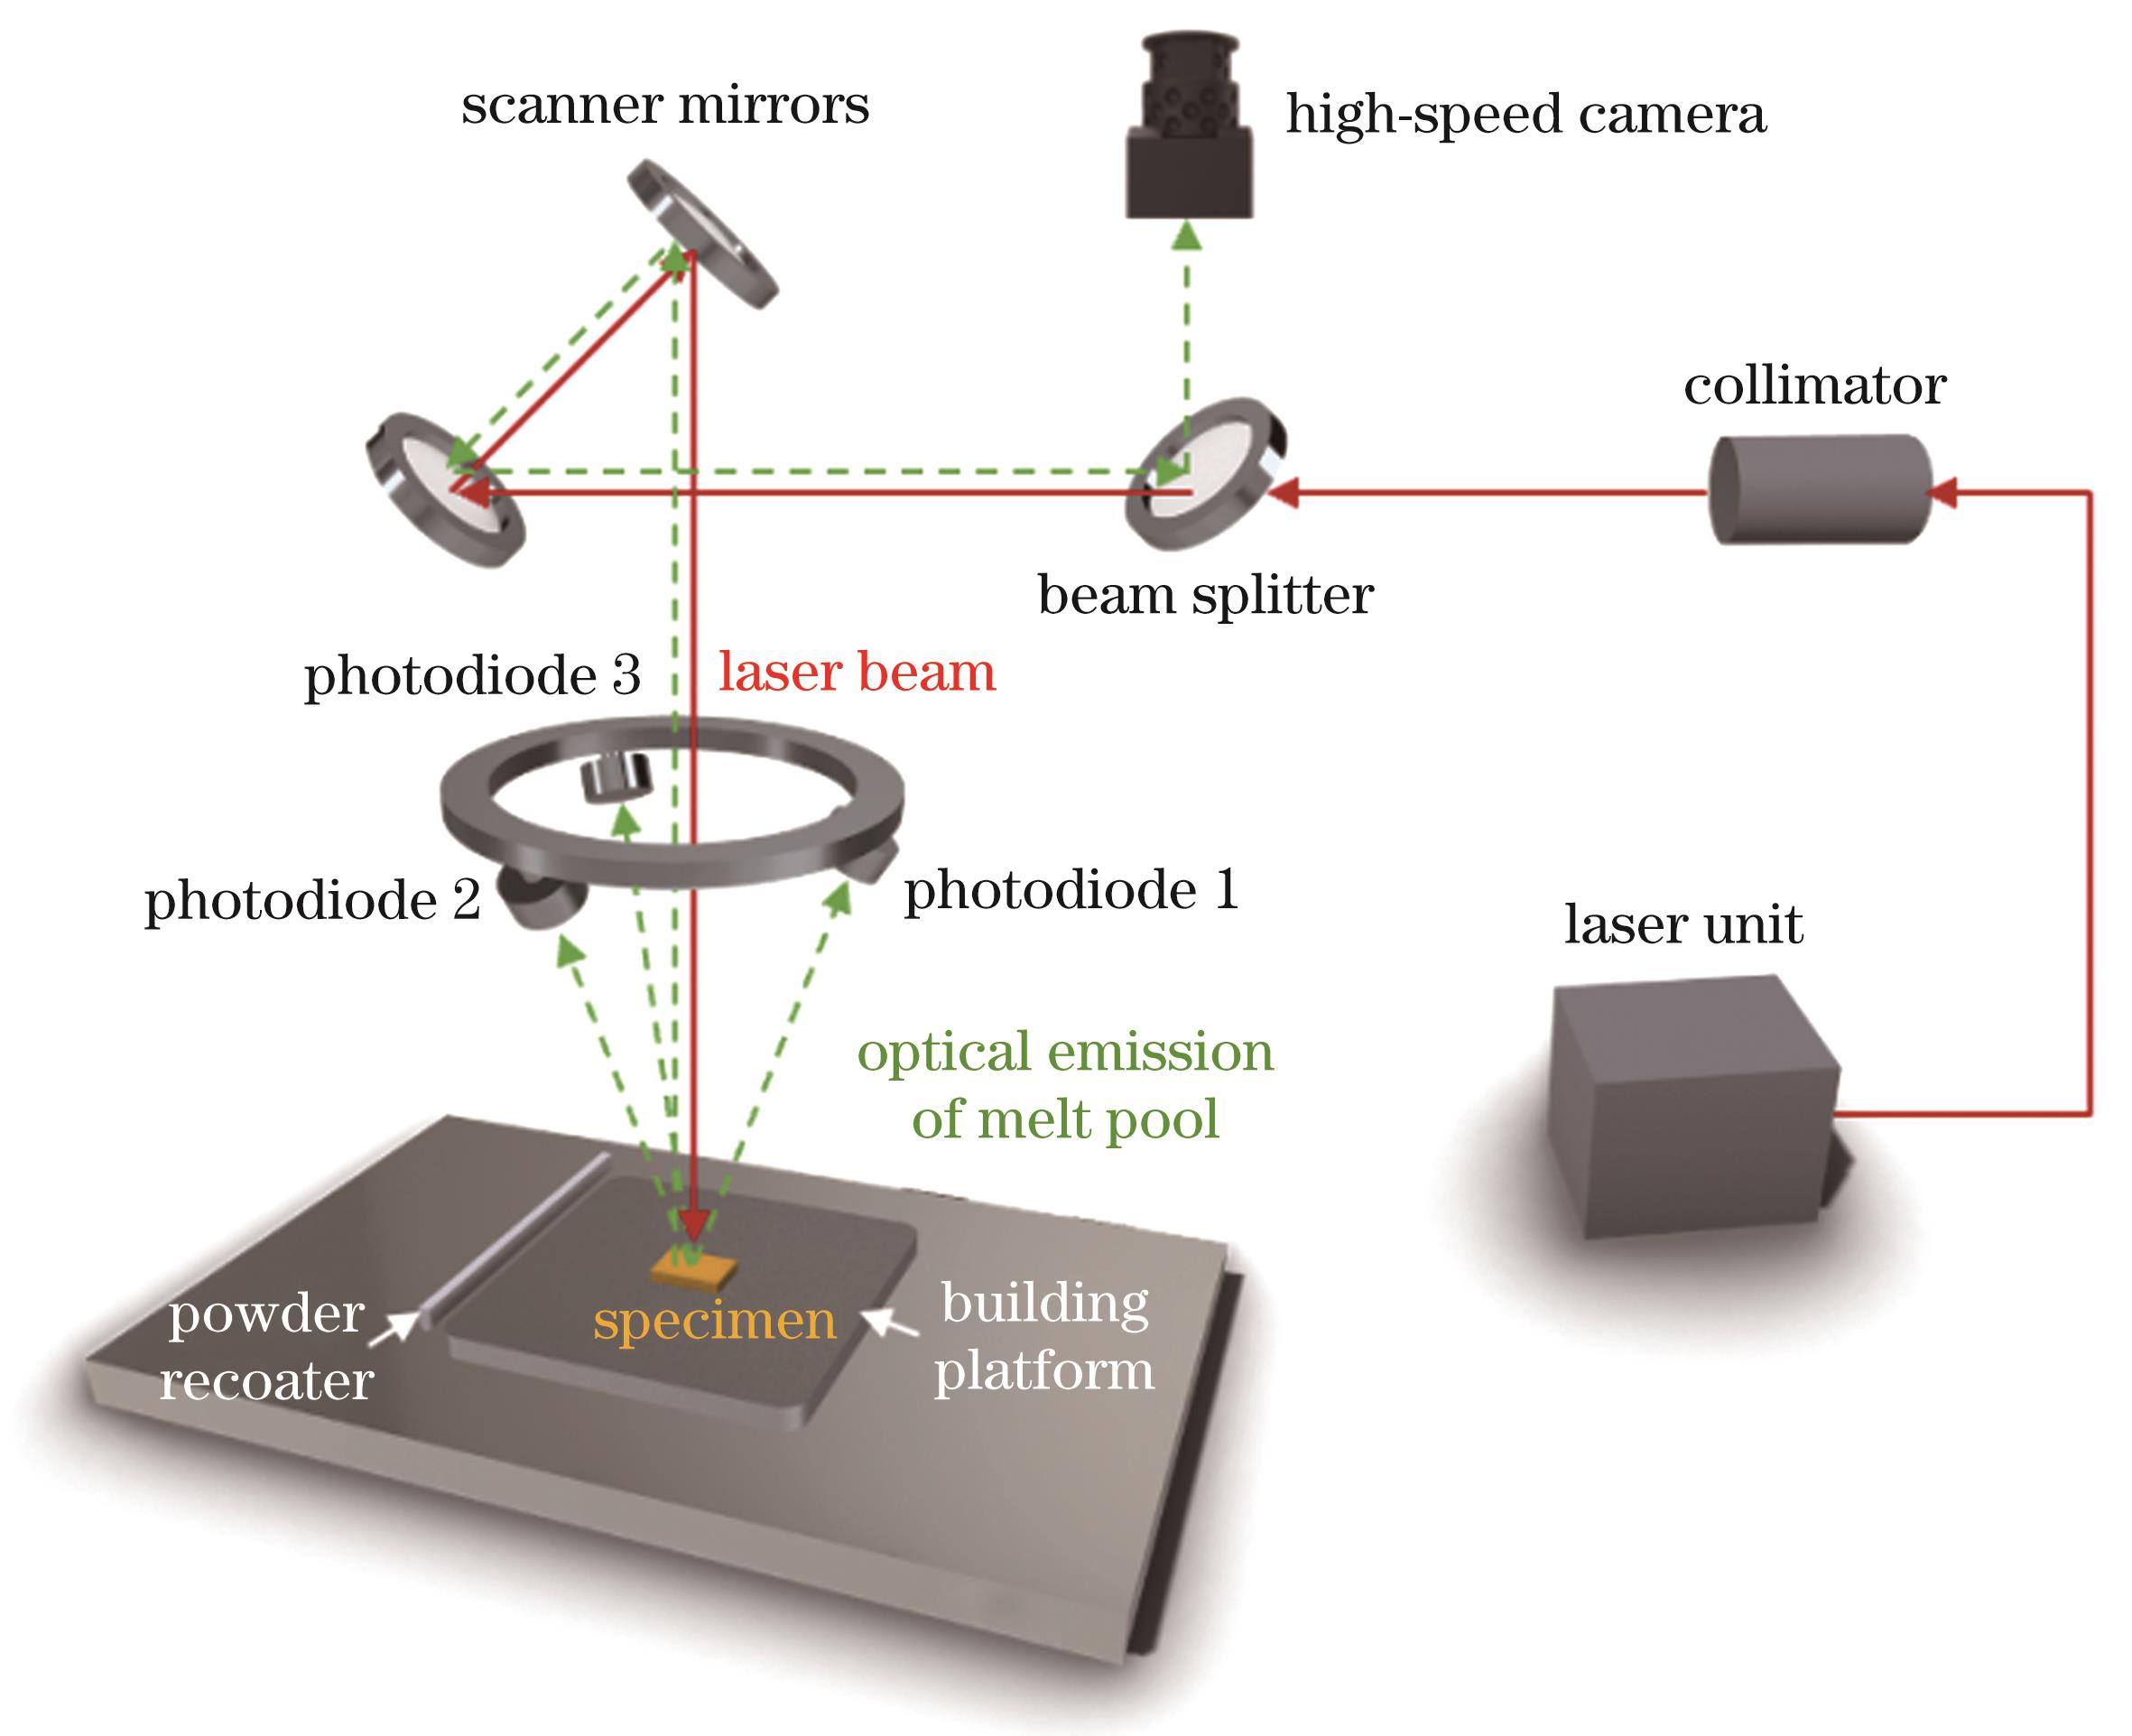 In-situ monitoring system based on optical signals of melt pool